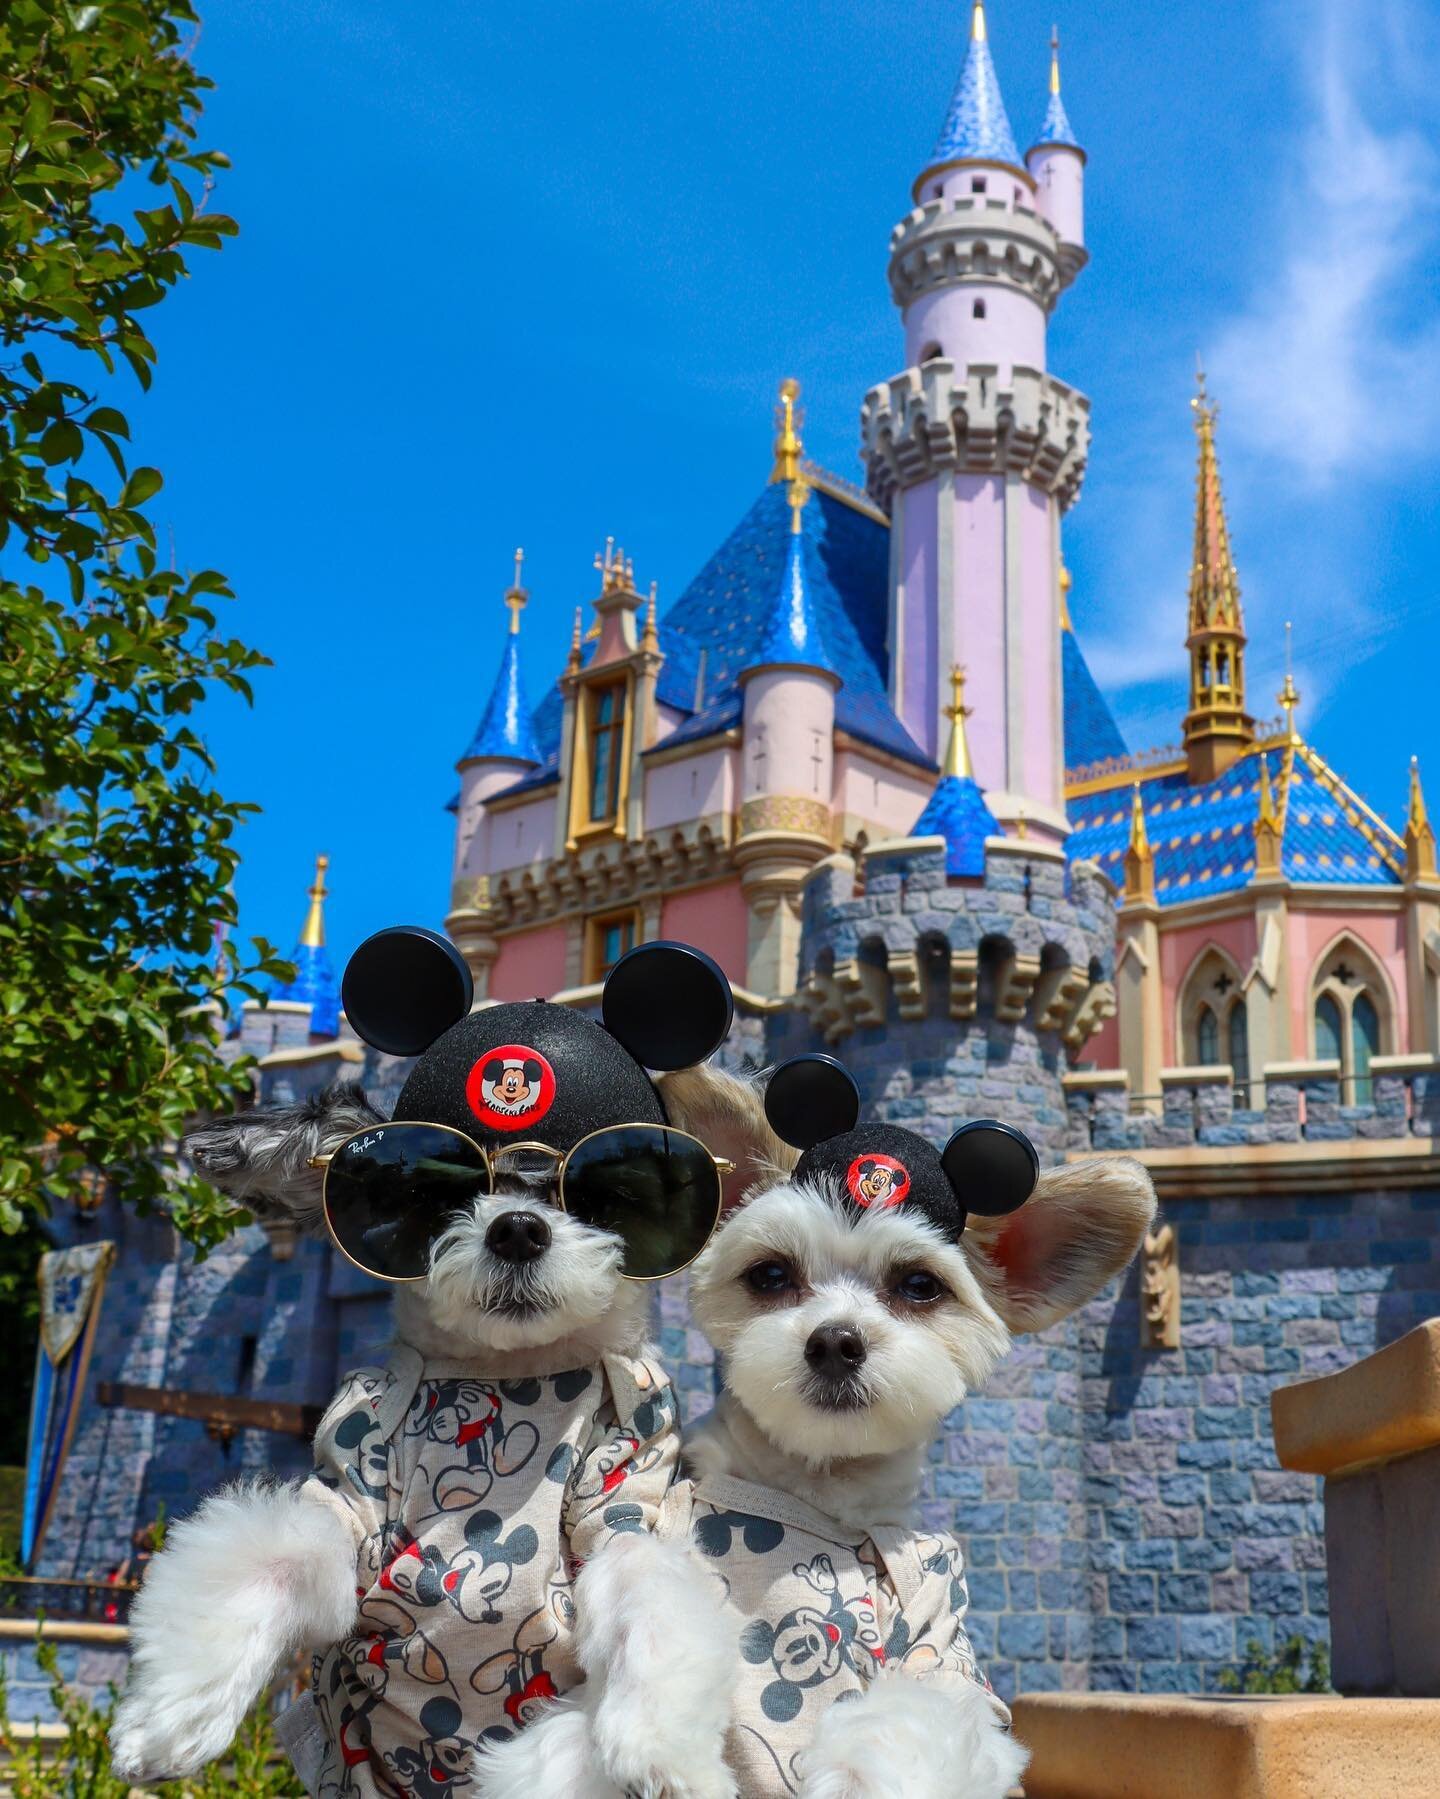 &ldquo;There&rsquo;s nothing more magical than this&rdquo; - Tinkerbelle and Belle✨🐶💕🏰 
.
.
.
.
.
.
#disneypets #dogsofworld #dogsoftheday #cutenessoverload #mickeyears #mouseears #dogsoftheworld #disneylandpark #disneylandcalifornia #ilovedisney 